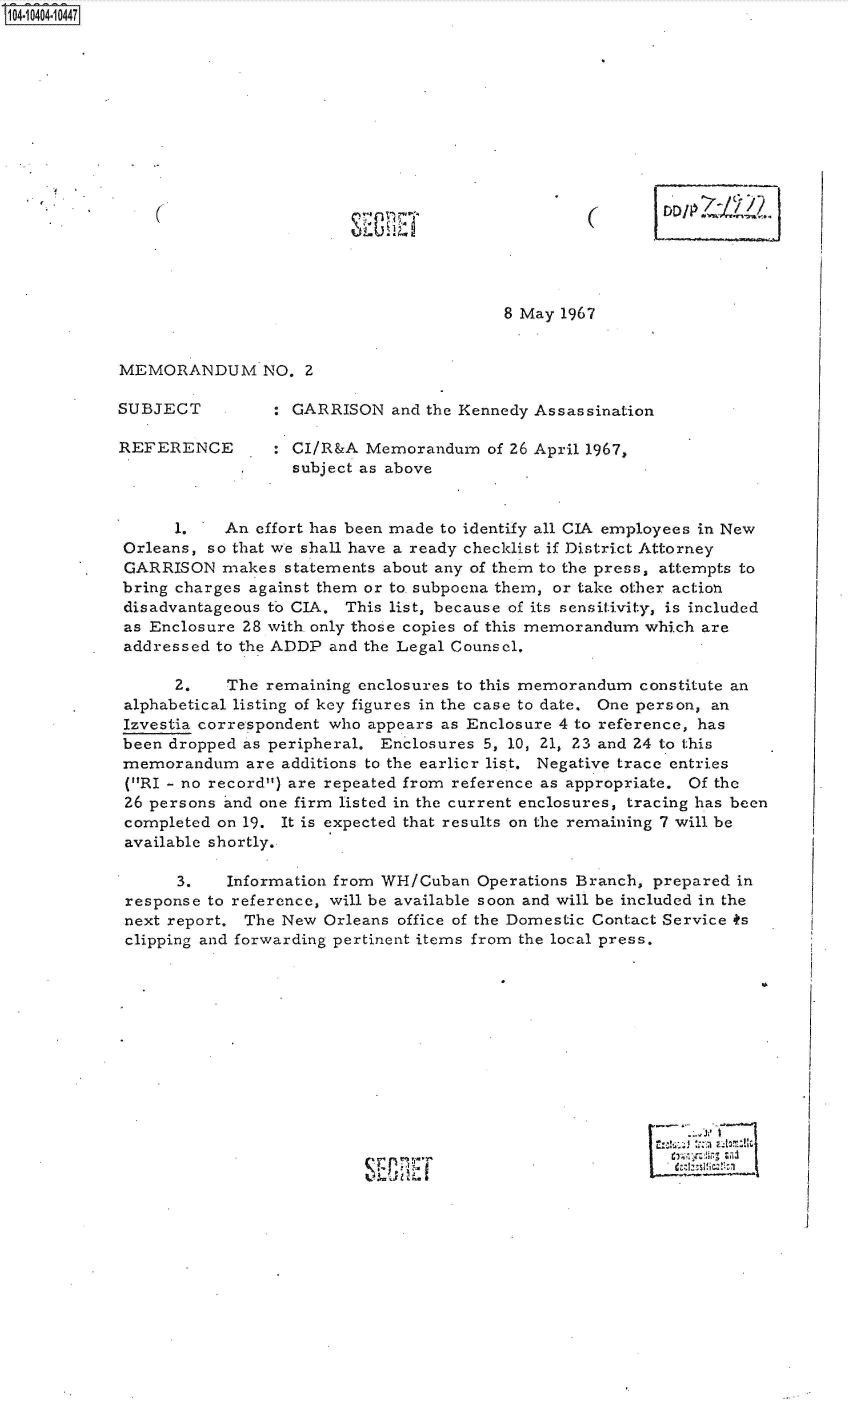 handle is hein.jfk/jfkarch48229 and id is 1 raw text is: S1O4~iO4O4~1O447


8 May 1967


MEMORANDUM NO. 2


SUBJECT

REFERENCE


: GARRISON   and the Kennedy Assassination

: CI/R&A  Memorandum   of 26 April 1967,
  subject as above


      1.   An effort has been made to identify all CIA employees in New
Orleans, so that we shall have a ready checklist if District Attorney
GARRISON   makes  statements about any of them to the press, attempts to
bring charges against them or to subpoena them, or take other action
disadvantageous to CIA. This list, because of its sensitivity, is included
as Enclosure 28 with. only those copies of this memorandum which are
addressed to the ADDP and the Legal Counsel.

      2.   The  remaining enclosures to this memorandum constitute an
alphabetical listing of key figures in the case to date. One person, an
Izvestia correspondent who appears as Enclosure 4 to reference, has
been dropped as peripheral. Enclosures 5, 10, 21, 23 and 24 to this
memorandum   are additions to the earlier list. Negative trace entries
(RI - no record) are repeated from reference as appropriate. Of the
26 persons and one firm listed in the current enclosures, tracing has been
completed on 19. It is expected that results on the remaining 7 will be
available shortly.

      3.   Information from WH/Cuban  Operations Branch, prepared in
response to reference, will be available soon and will be included in the
next report. The New  Orleans office of the Domestic Contact Service ts
clipping and forwarding pertinent items from the local press.


.1


(


(


J U


